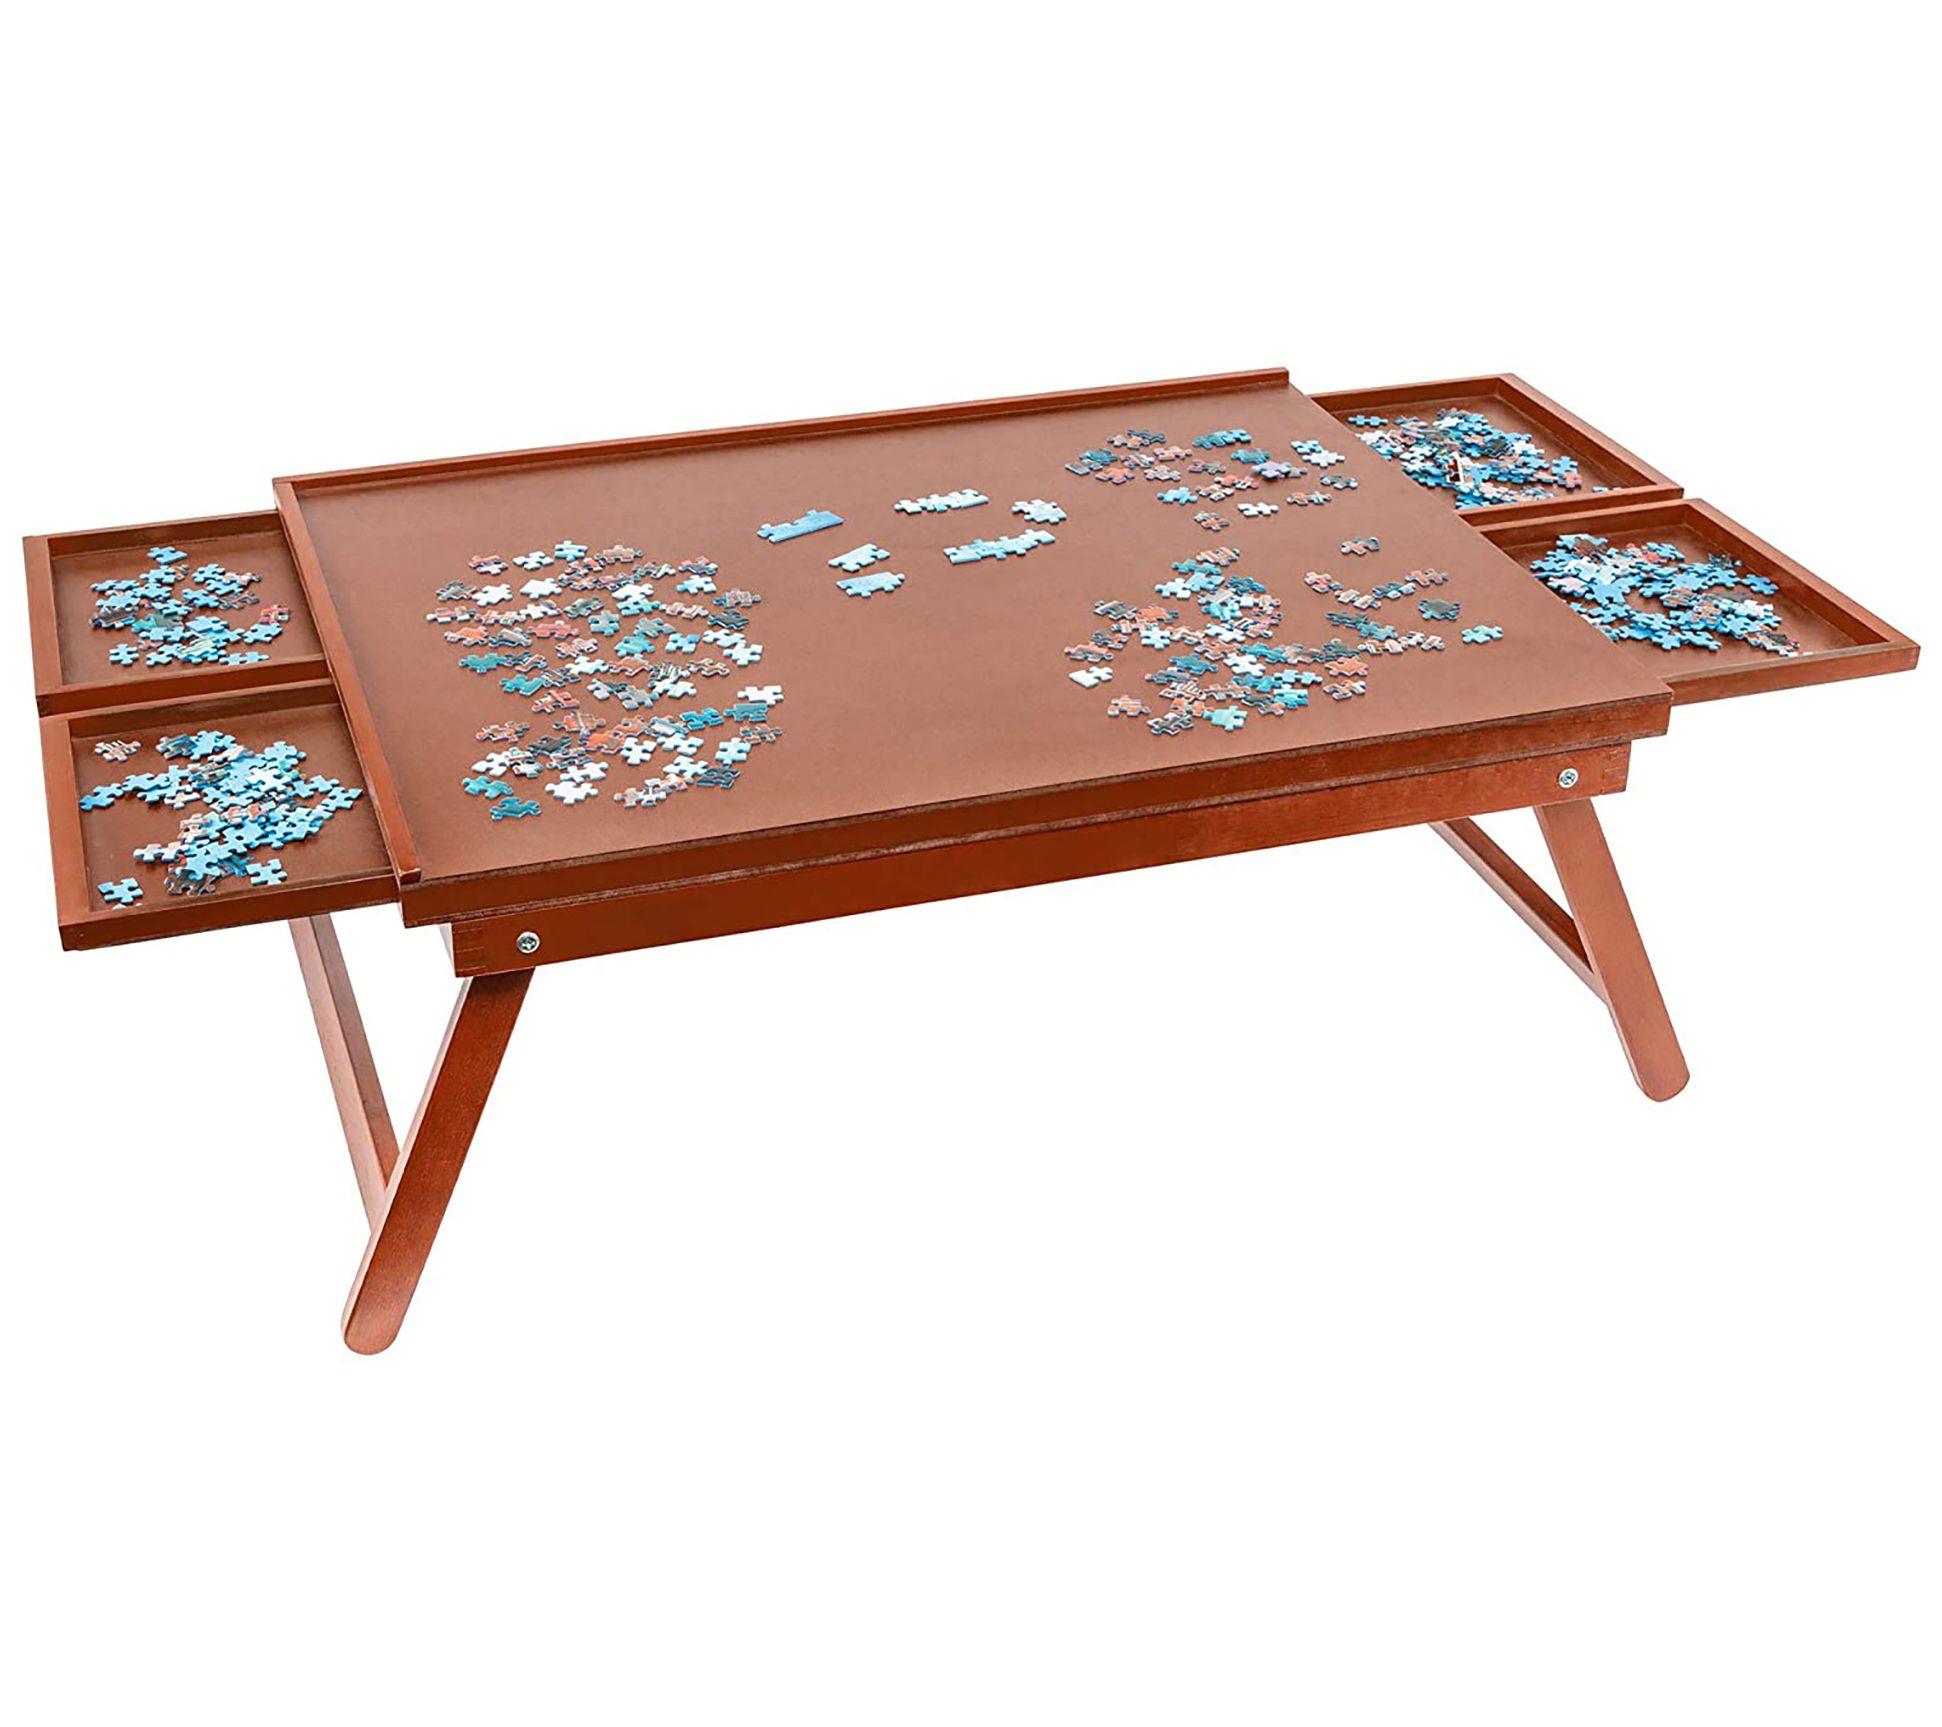 Puzzle Table with Drawers and Legs